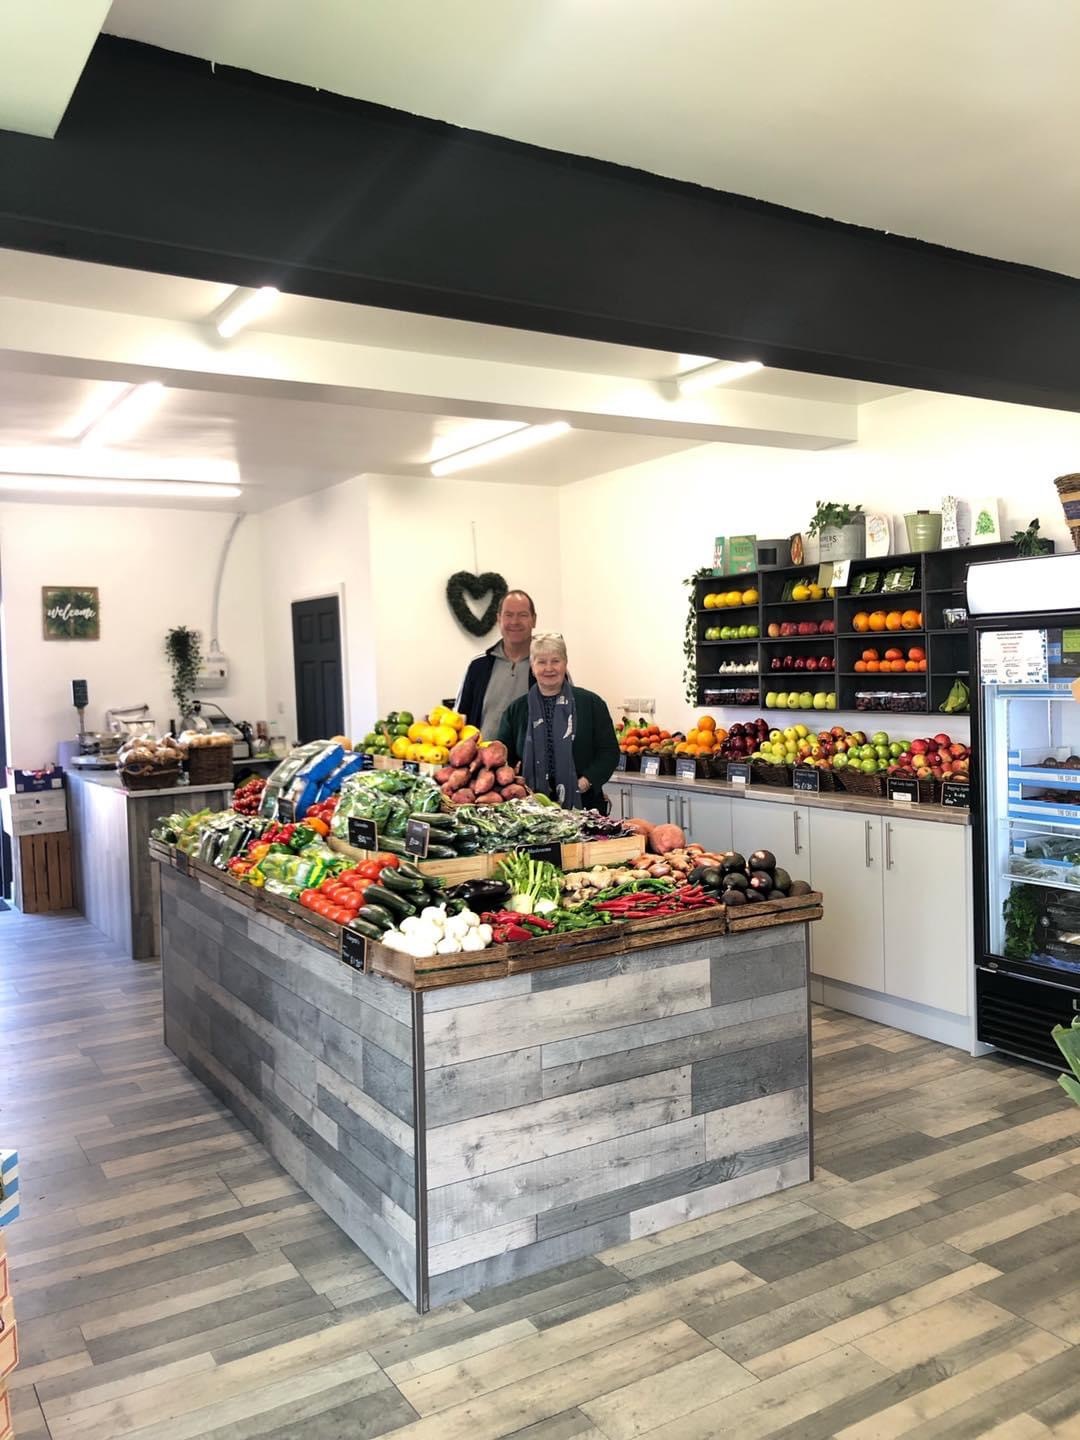 The interior of the new premises for Ians 5 A Day, which has moved to Western Avenue in Blacon, Chester following the move from Chester Market.